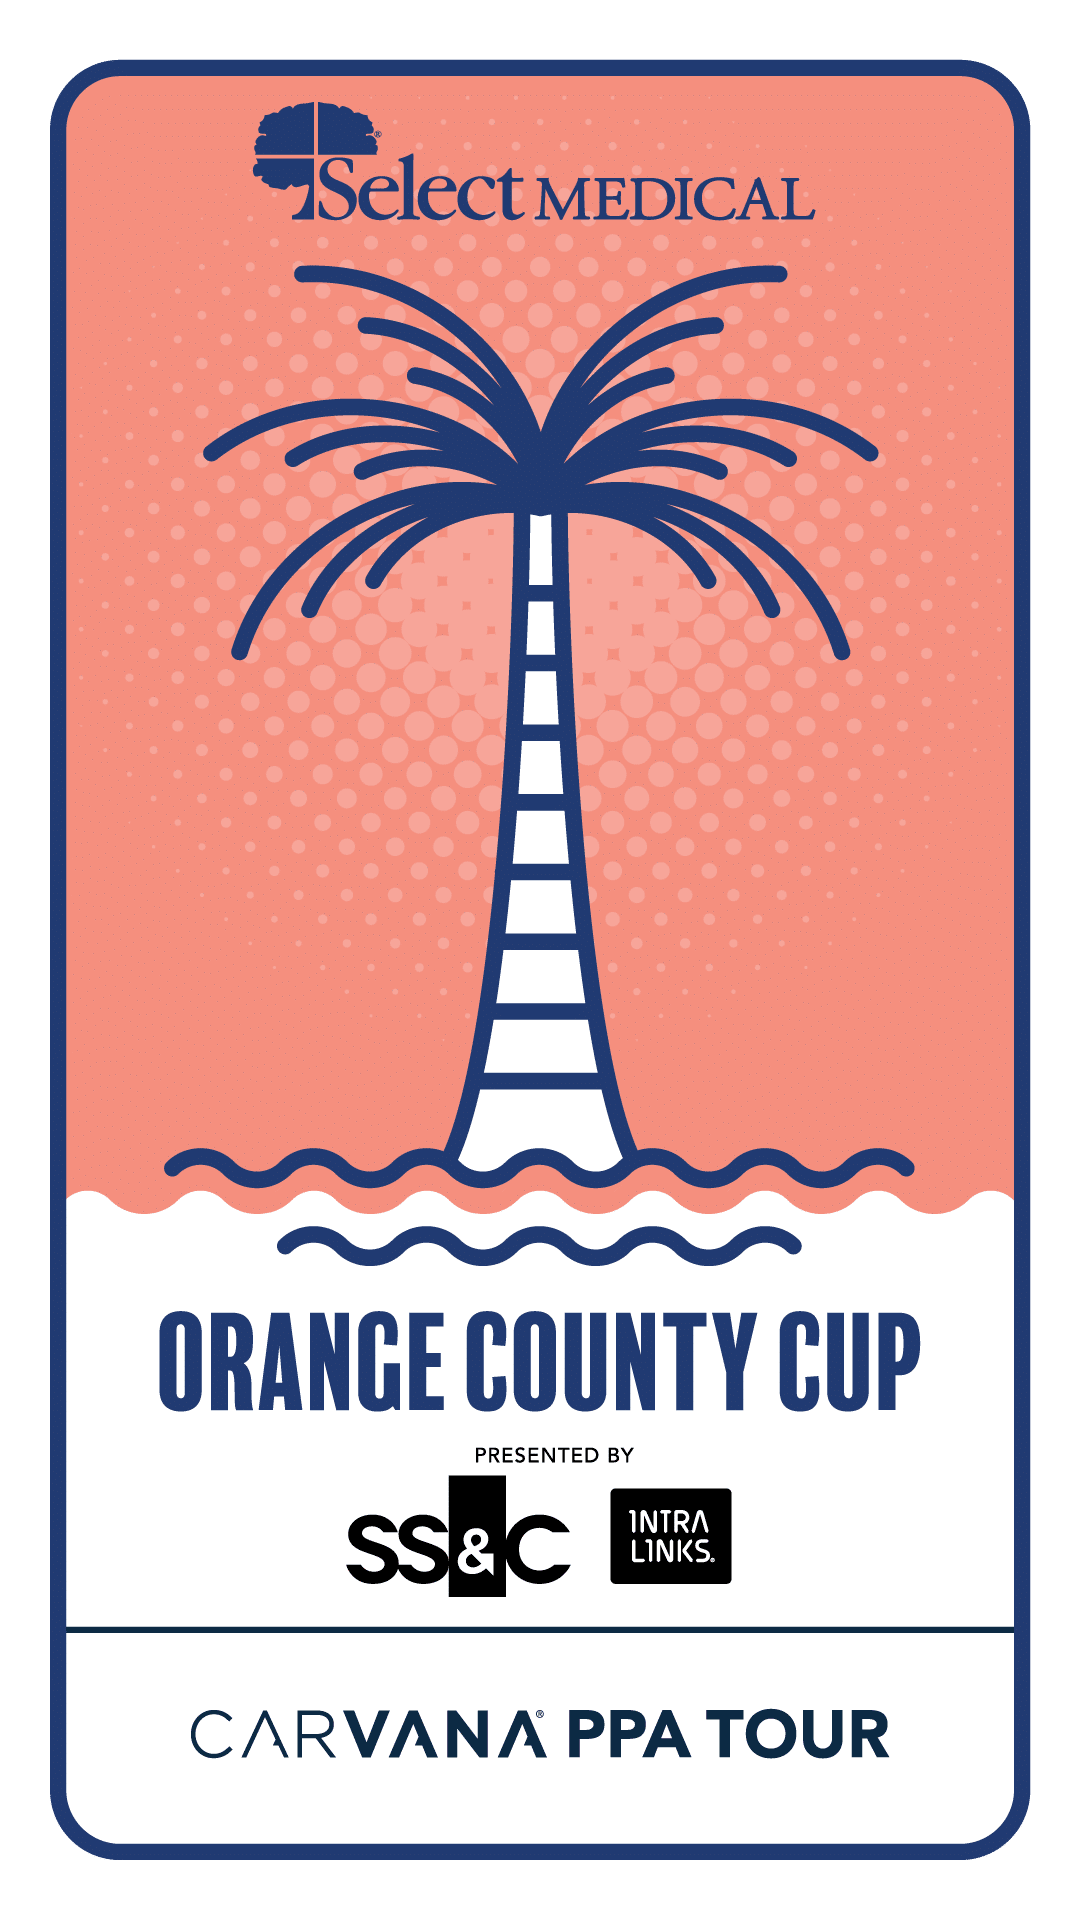 Carvana PPA Tour Select Medical Orange County Cup Presented by Intralinks Tournament Logo PNG